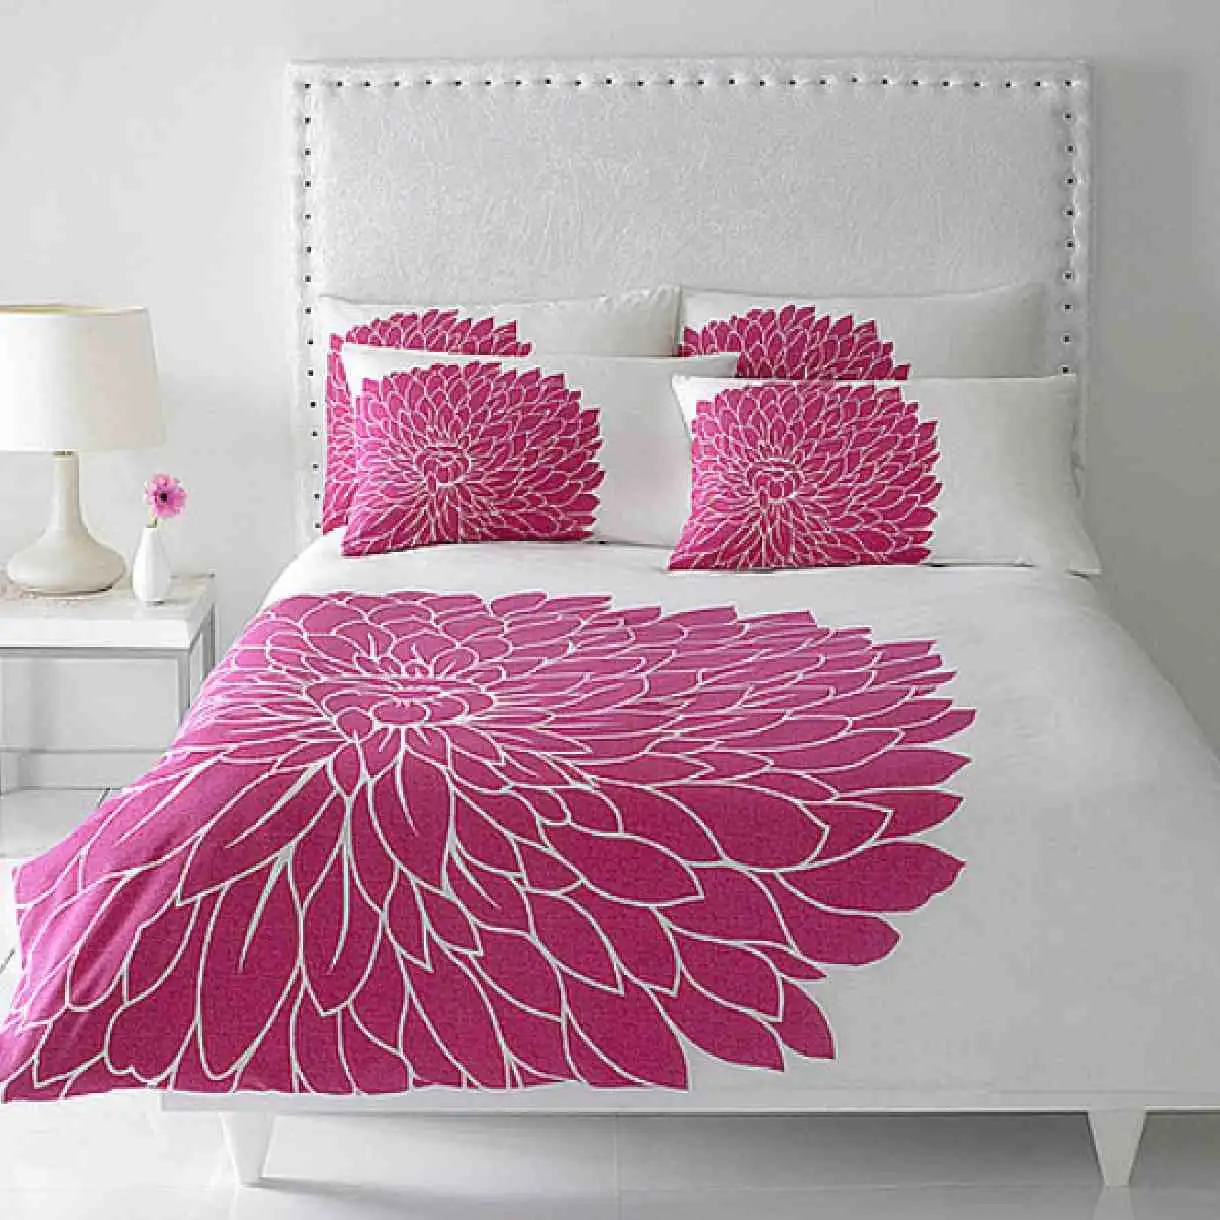 sweet bedroom interior design with pink color